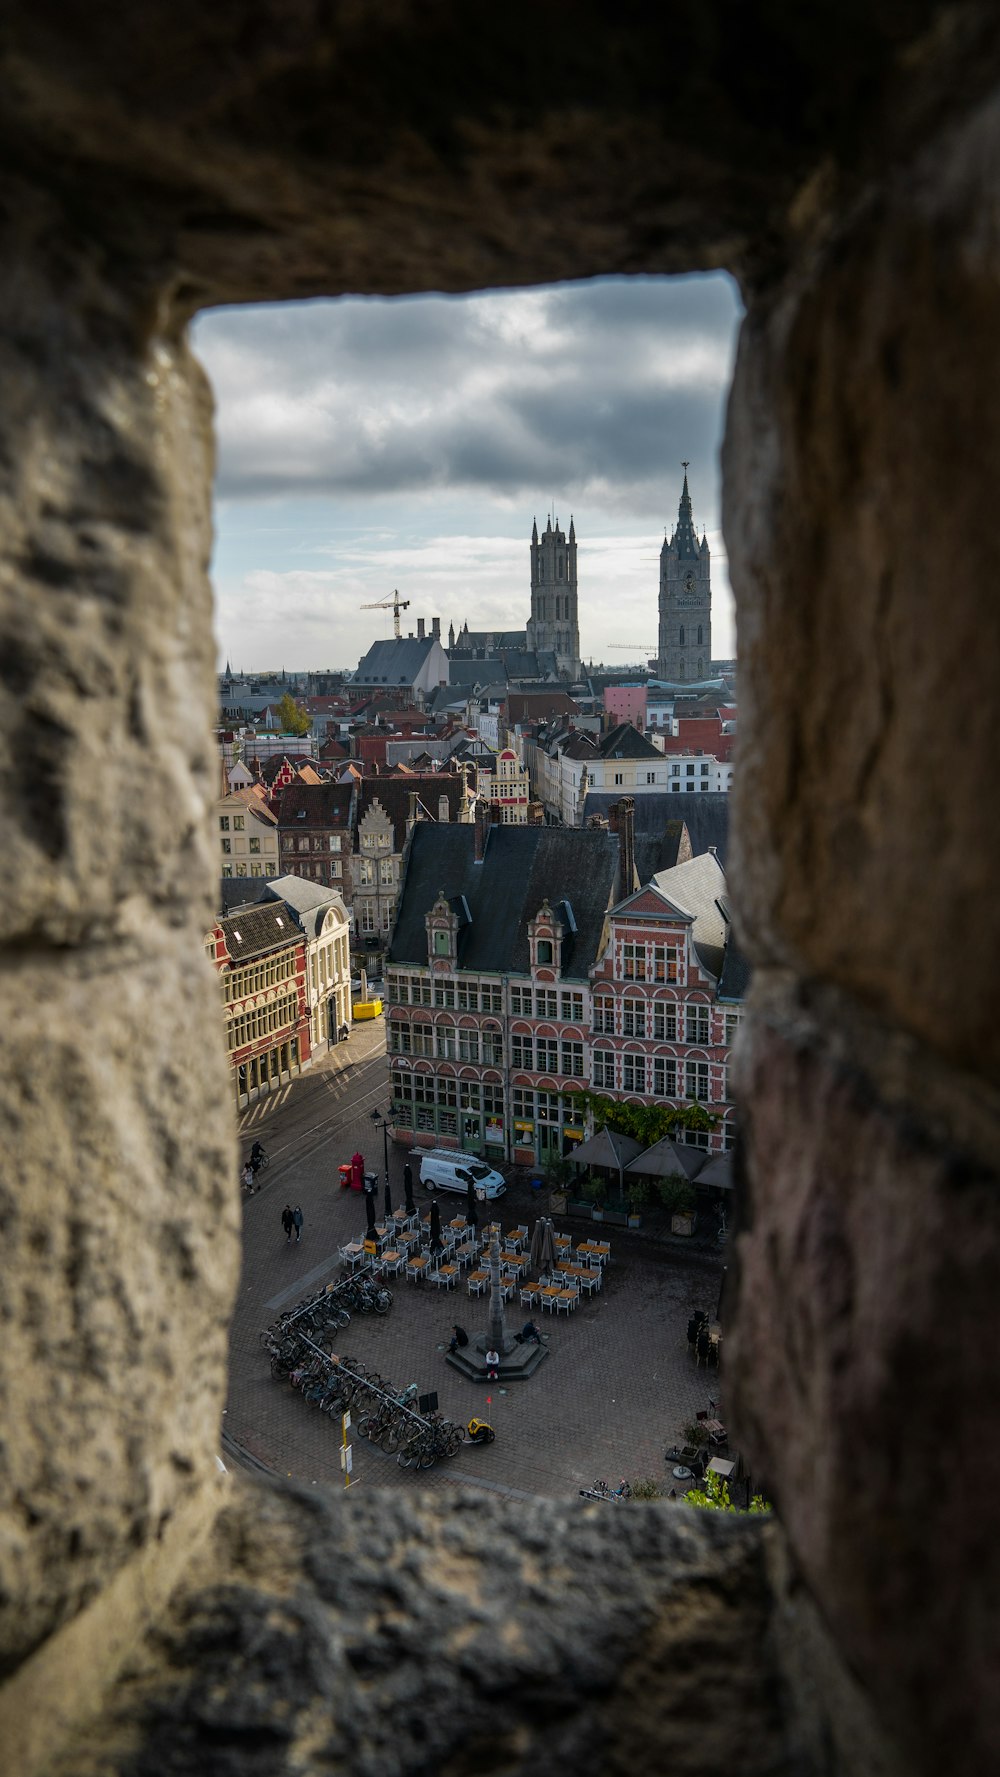 a view of a city through a hole in a stone wall